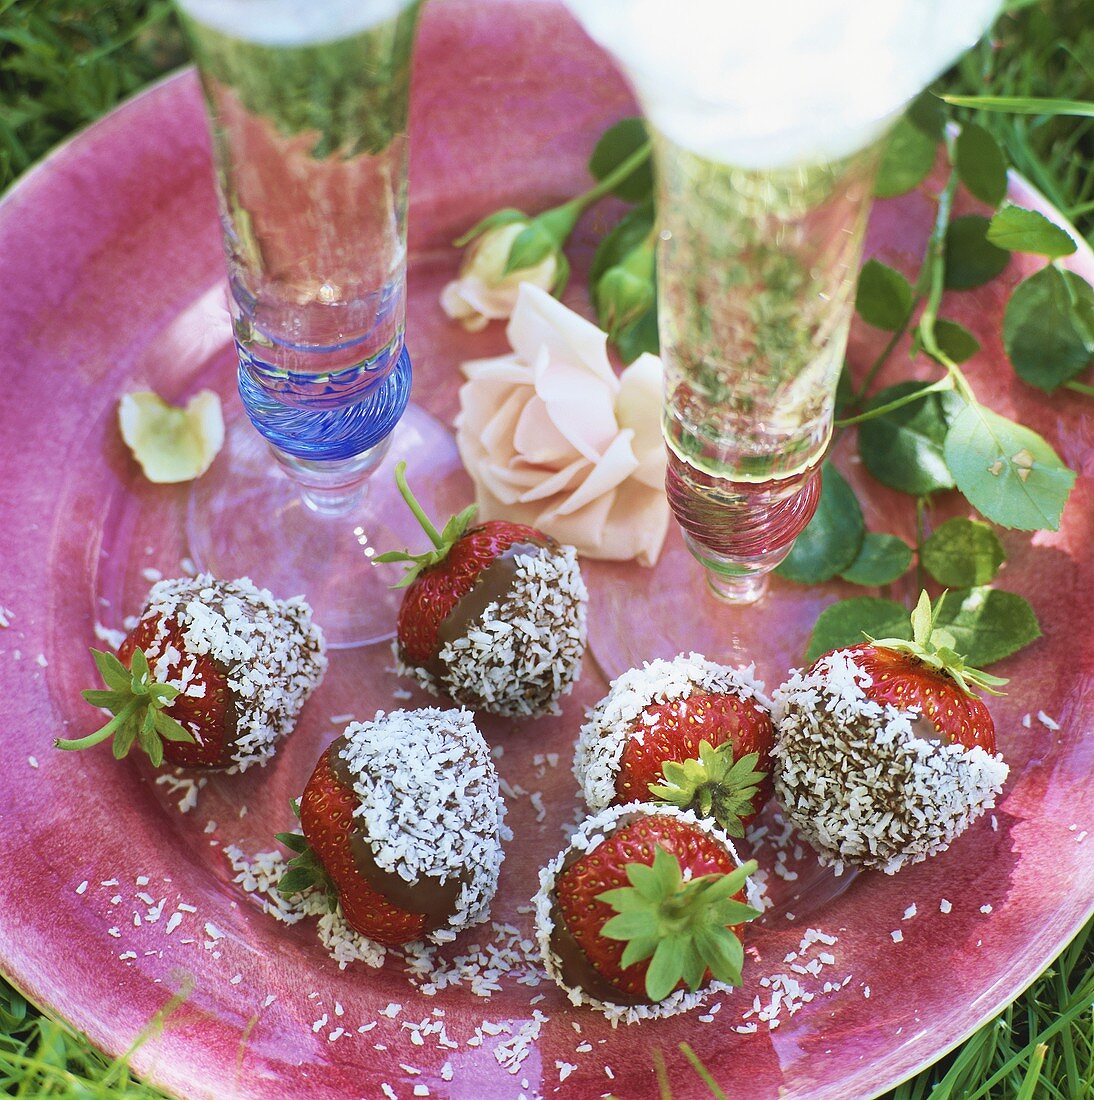 Strawberries dipped in chocolate & coconut, champagne